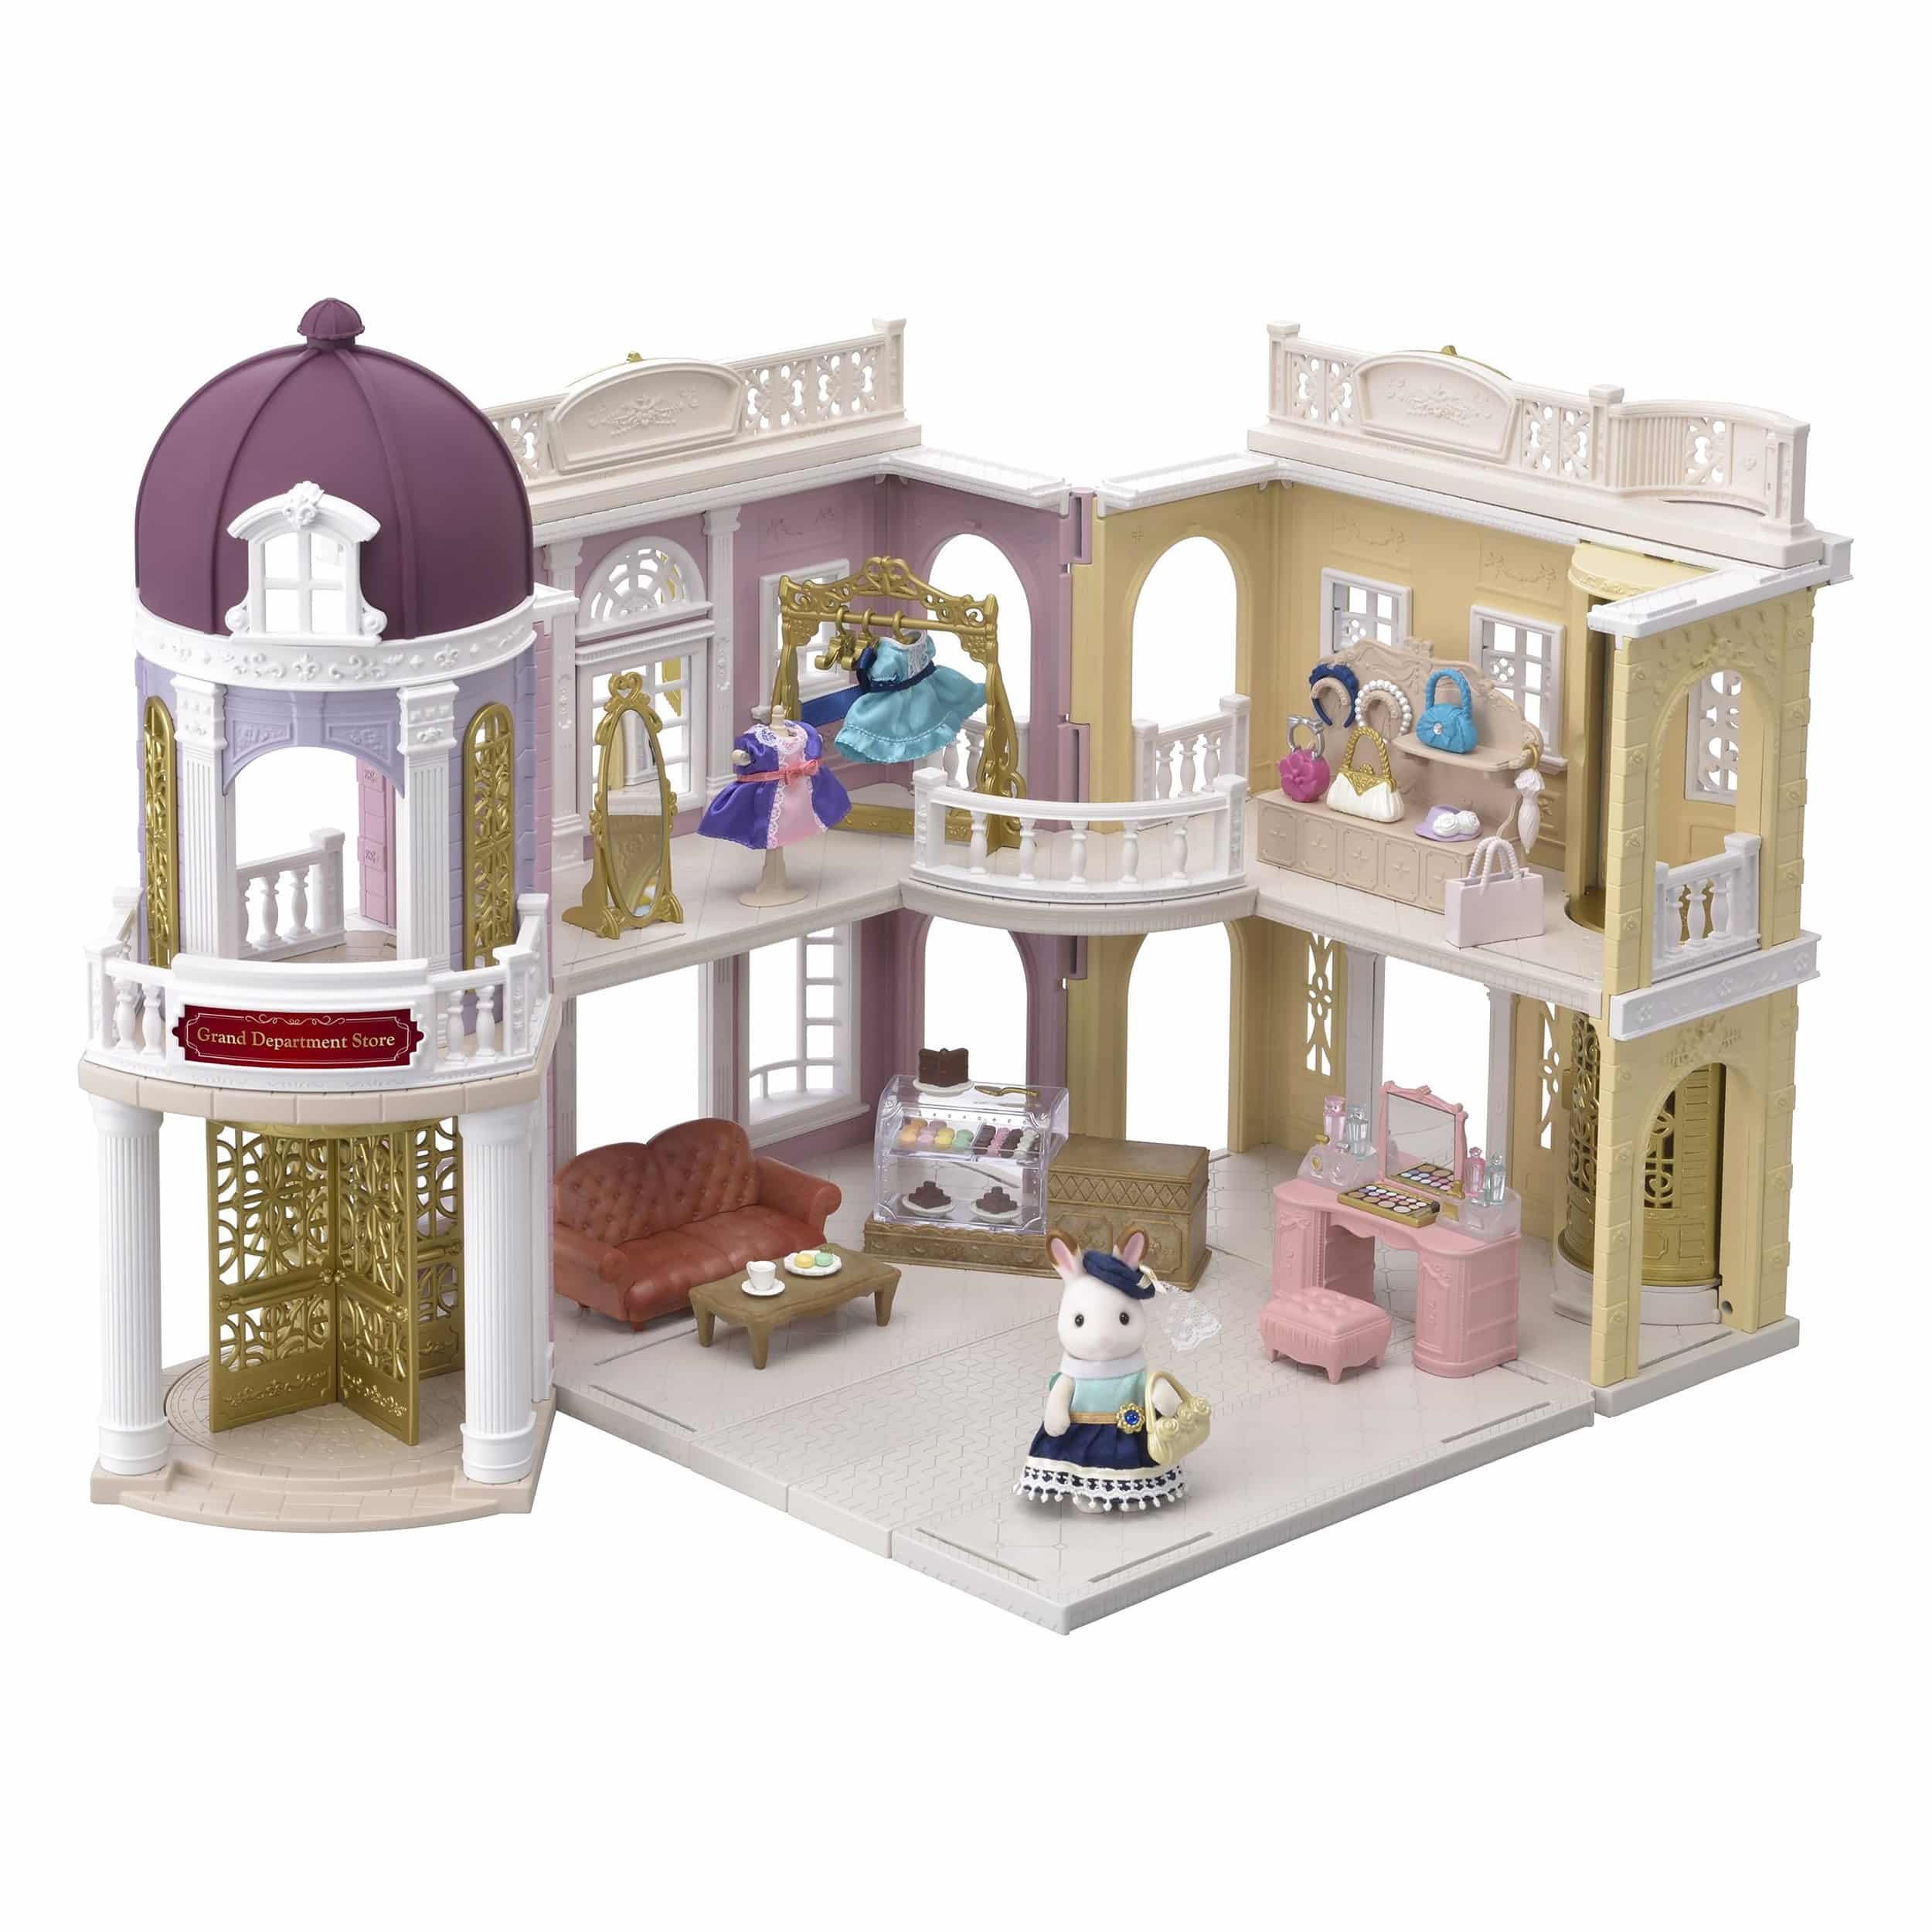 Sylvanian Families -Grand Department Store Gift Set SF6022